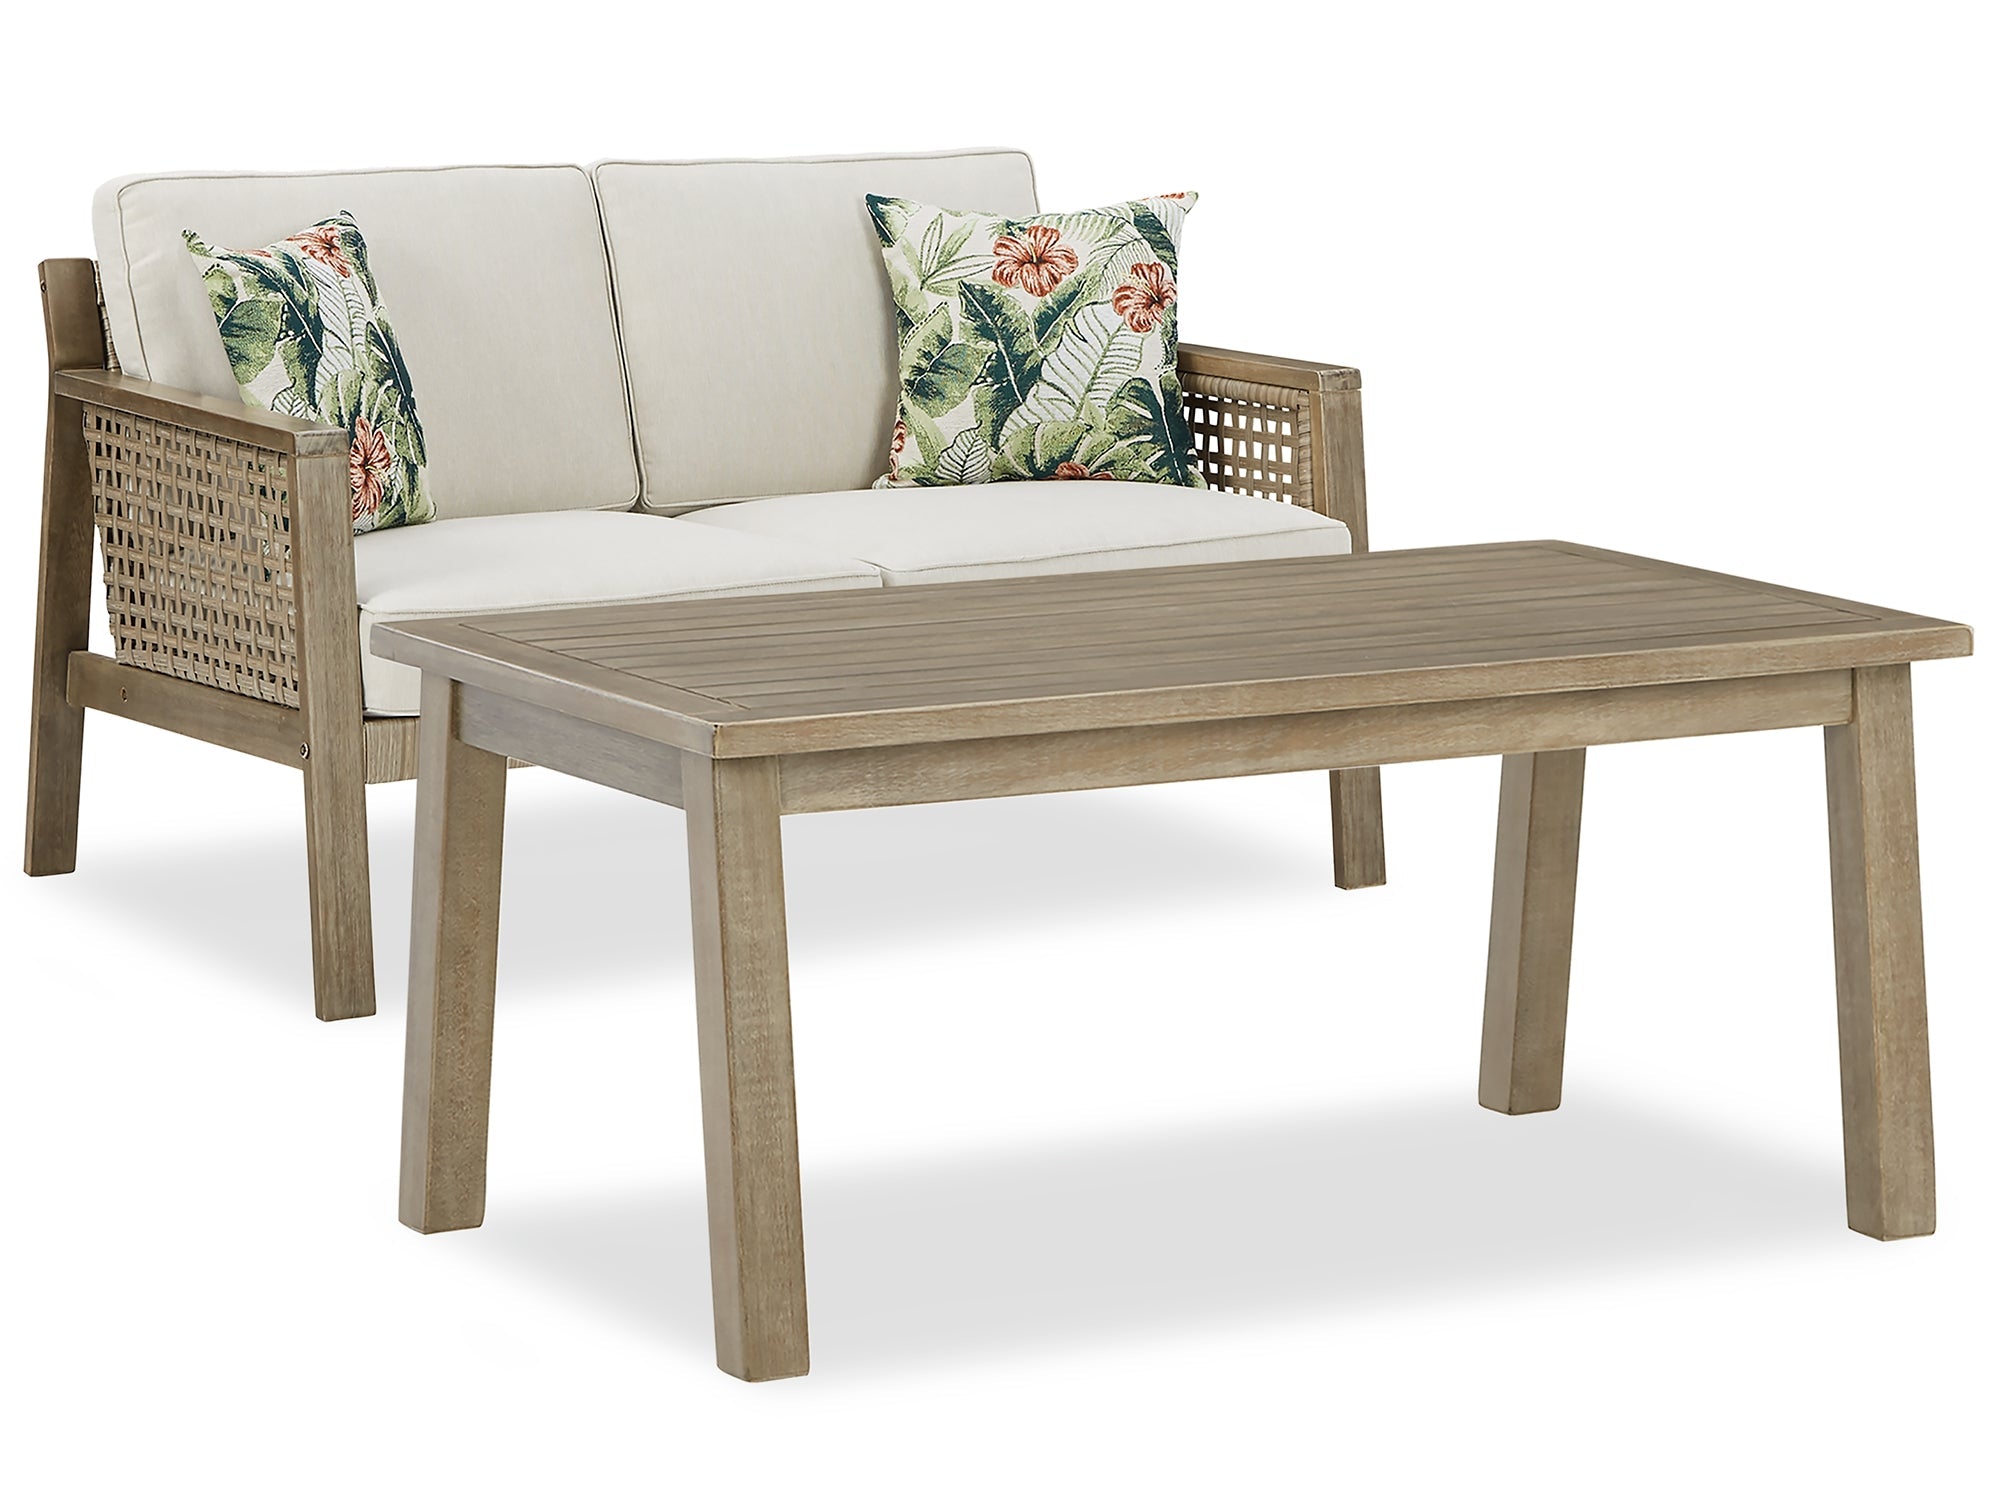 Barn Cove Outdoor Loveseat with Coffee Table